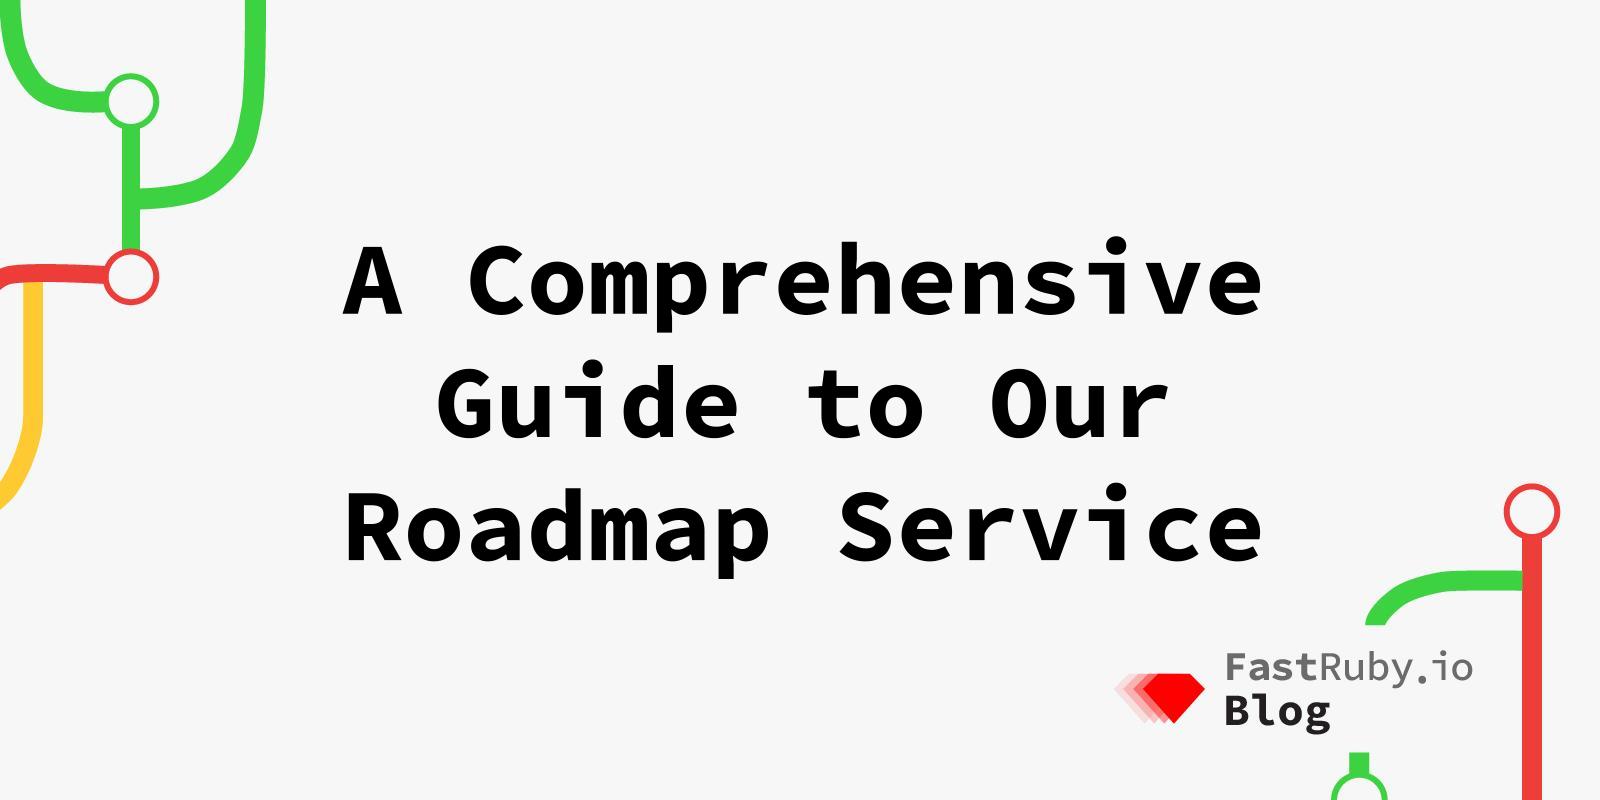 A Comprehensive Guide to Our Roadmap Service